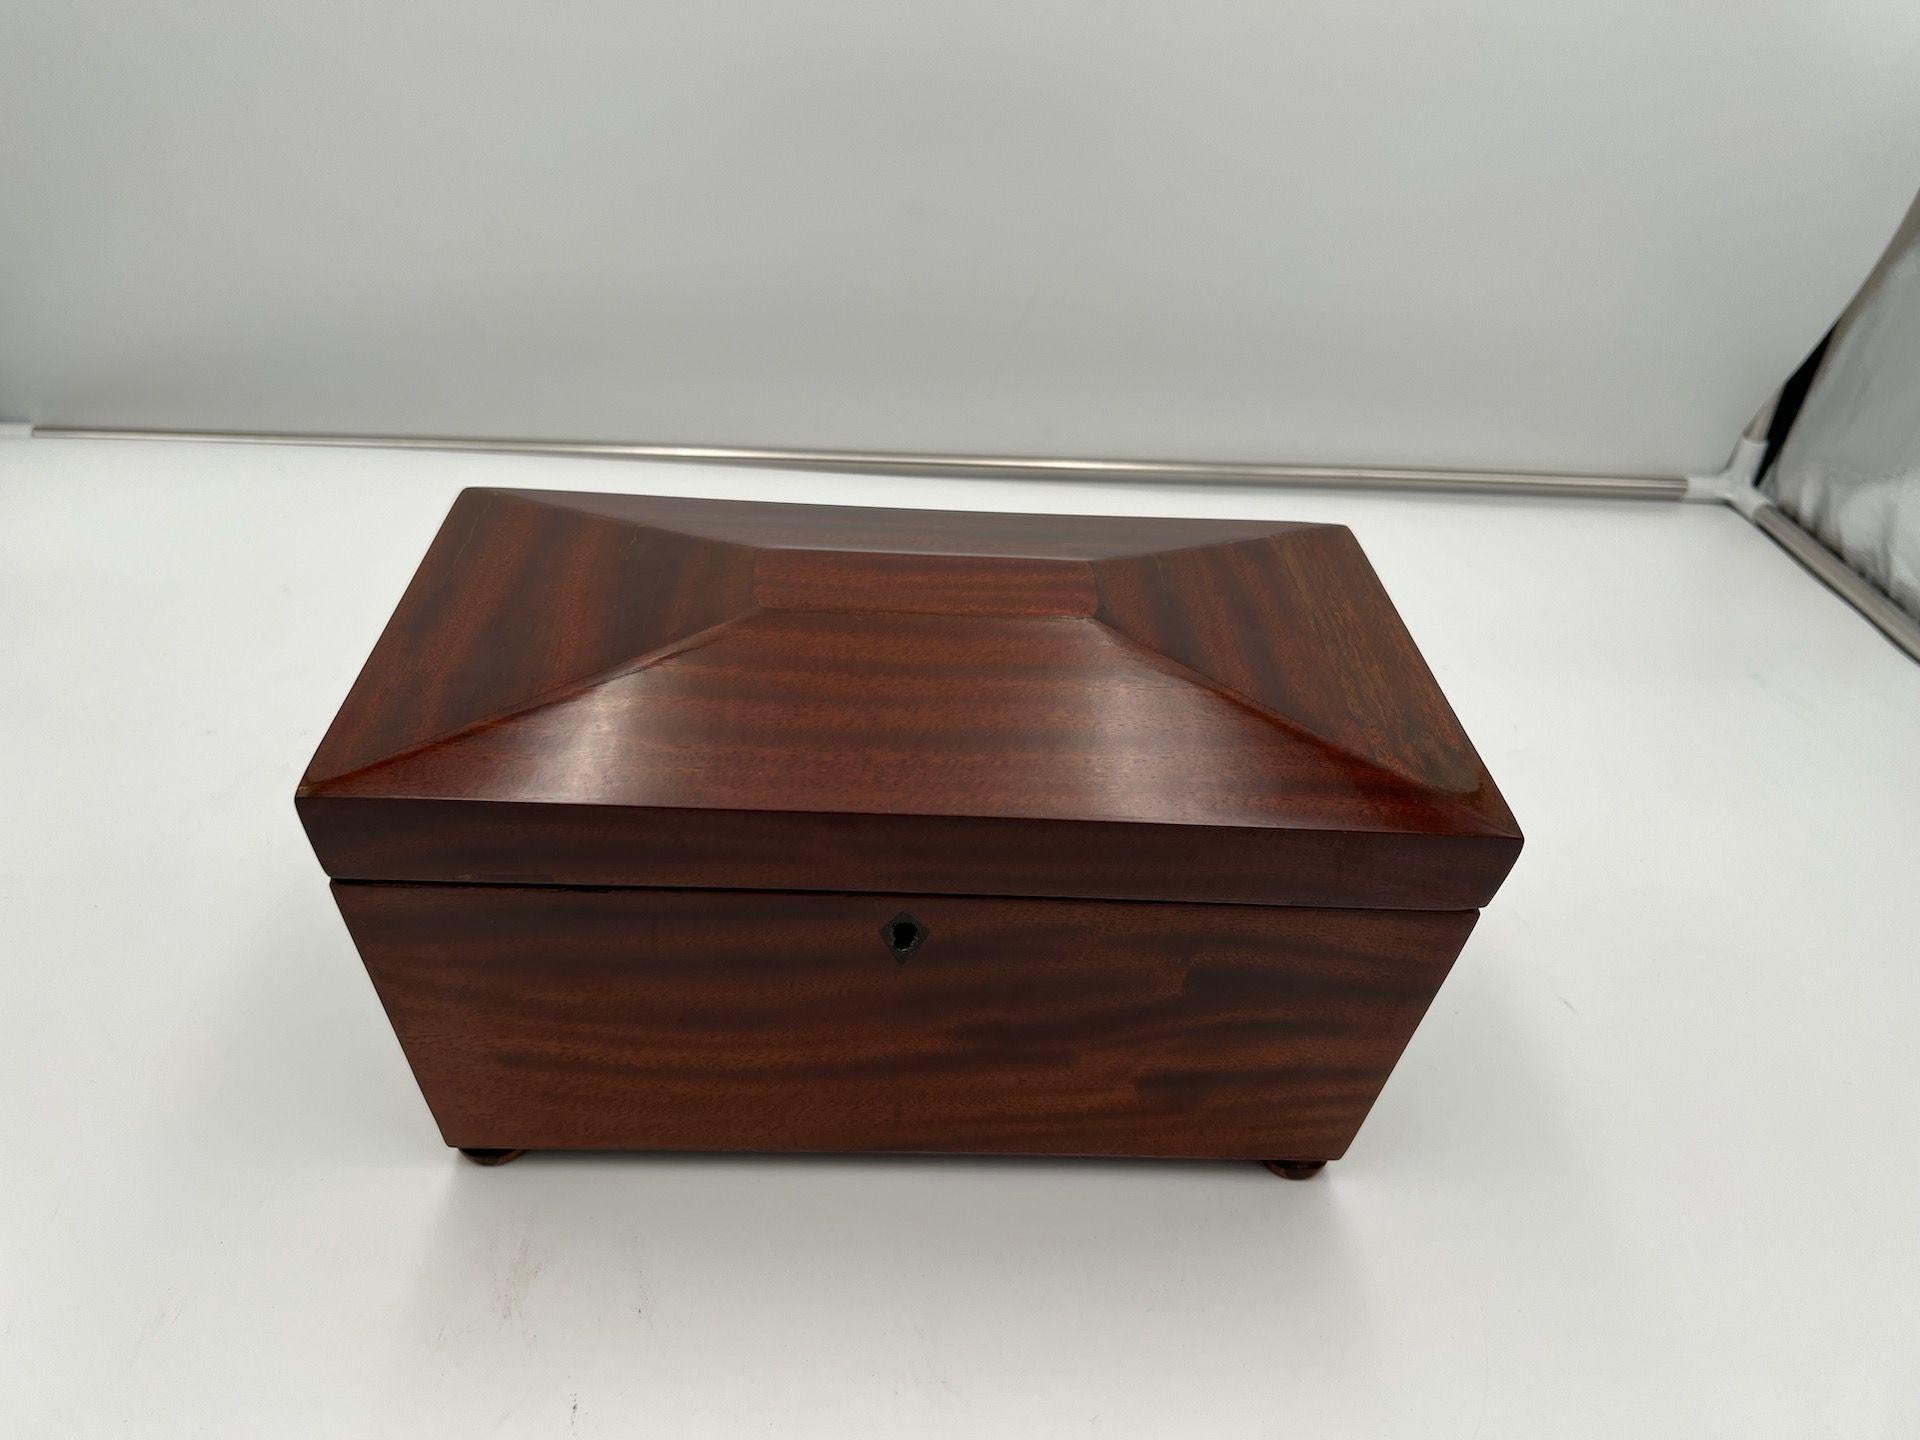 Mahogany solid wood, Shellac and-polished.
Brass hinges and lock.
Dimensions: H 60 cm x W 28.3 cm x 16.5 cm.